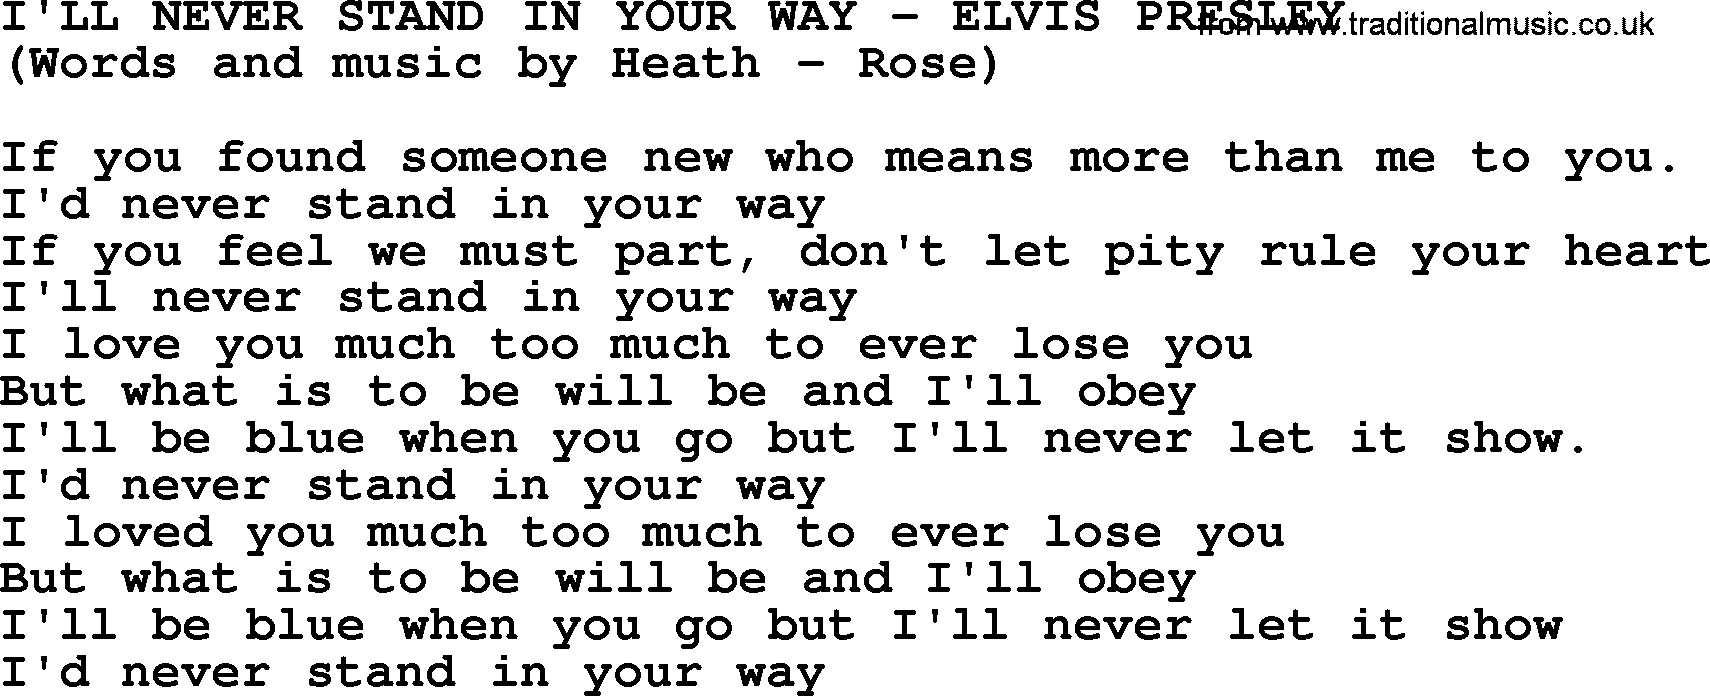 Elvis Presley song: I'll Never Stand In Your Way lyrics